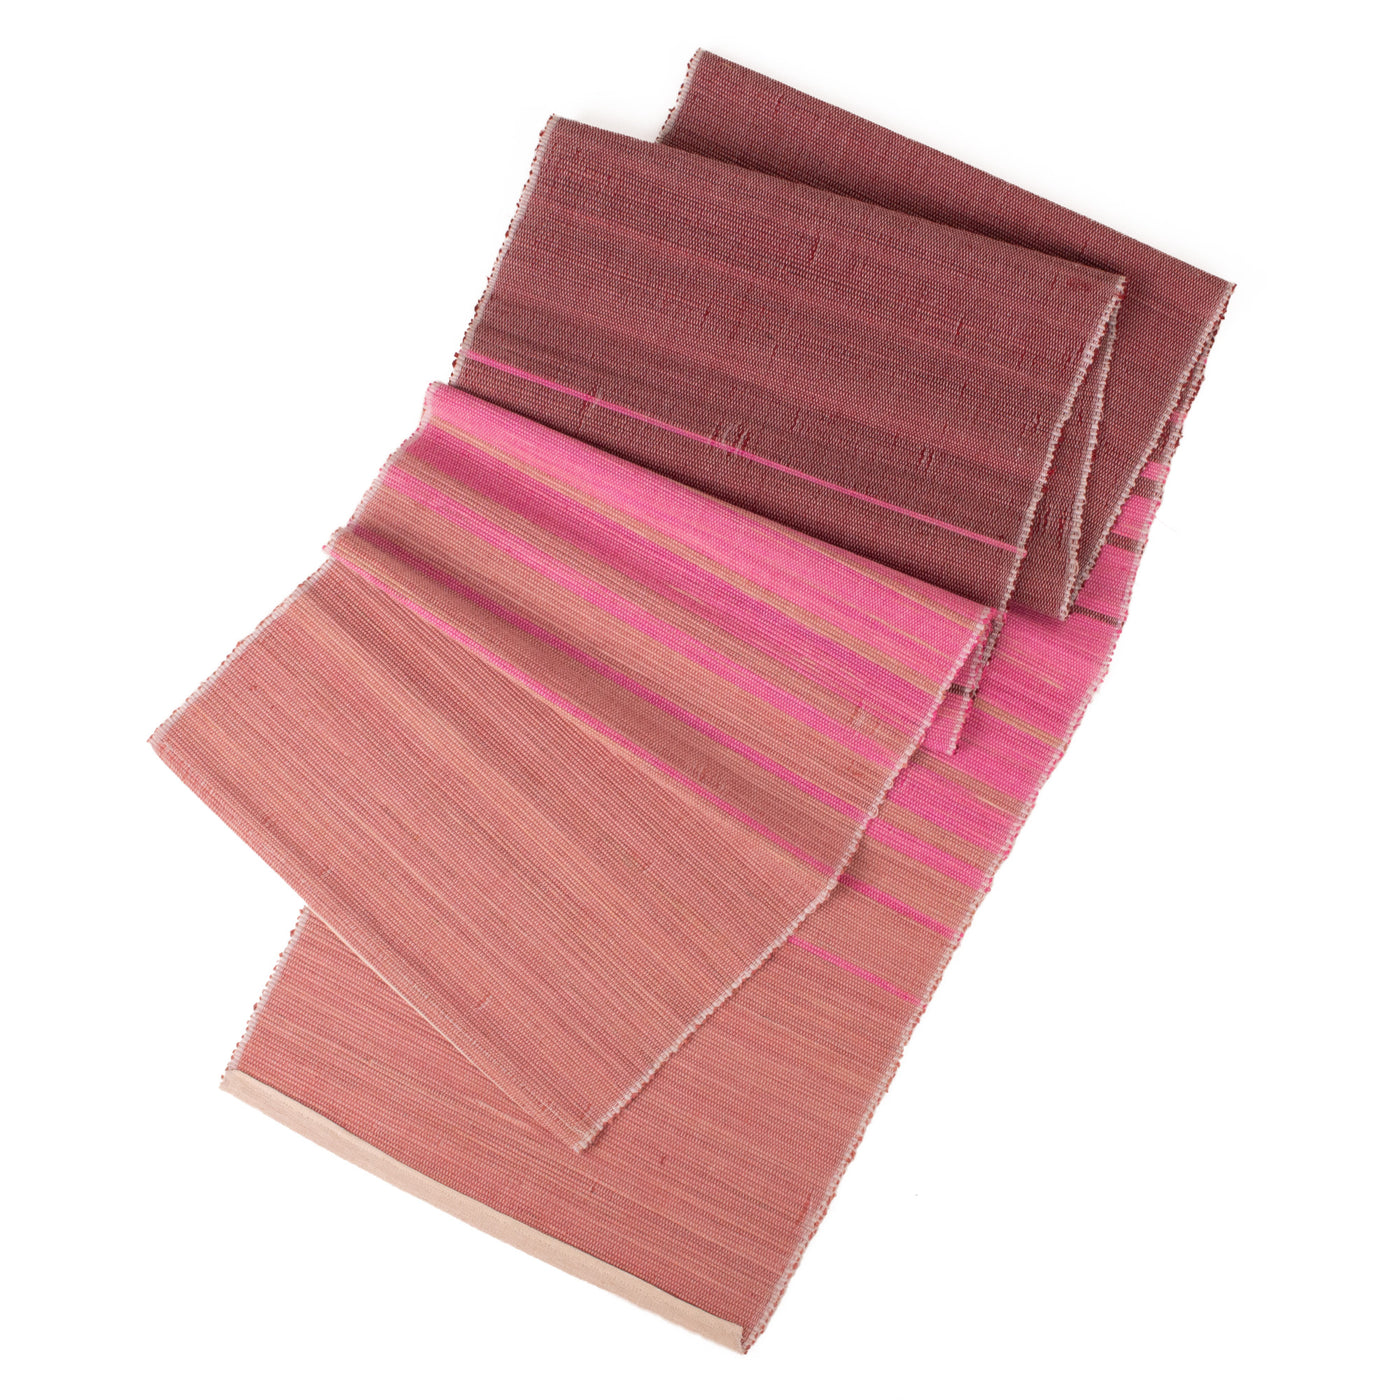 Cherished Table Runner - 72" Pink Ombre